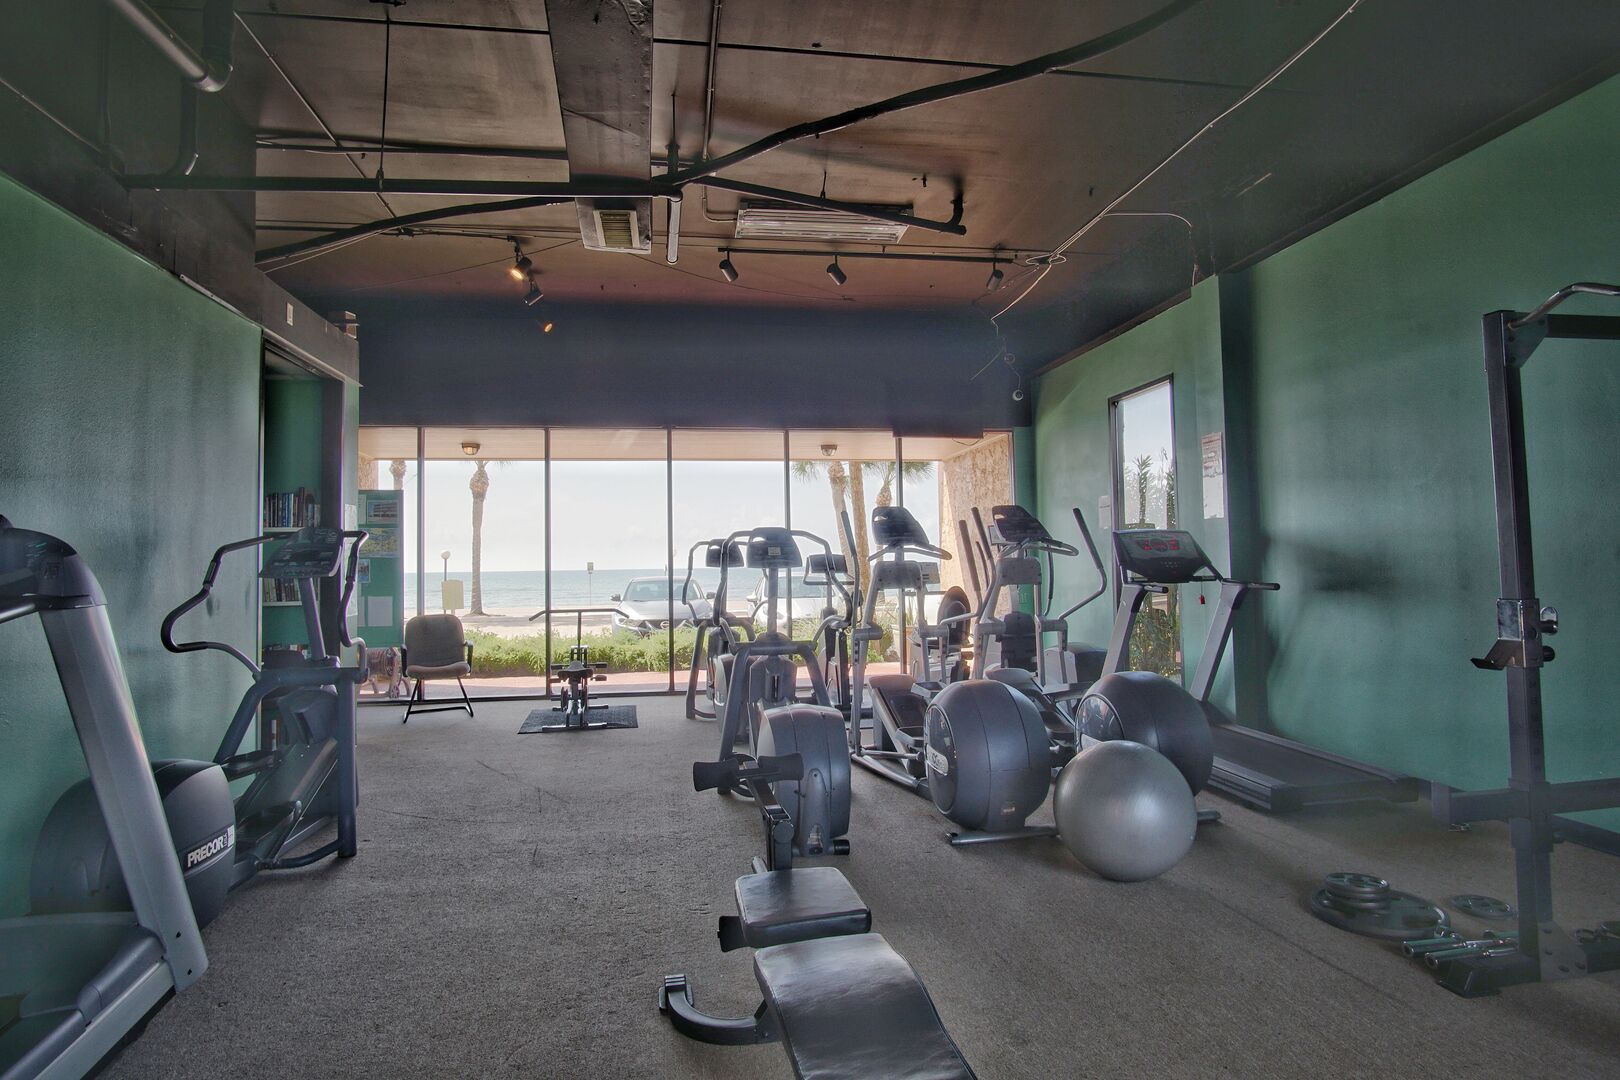 Gym located at the front of the building. Views of the Gulf of Mexico while you work out.